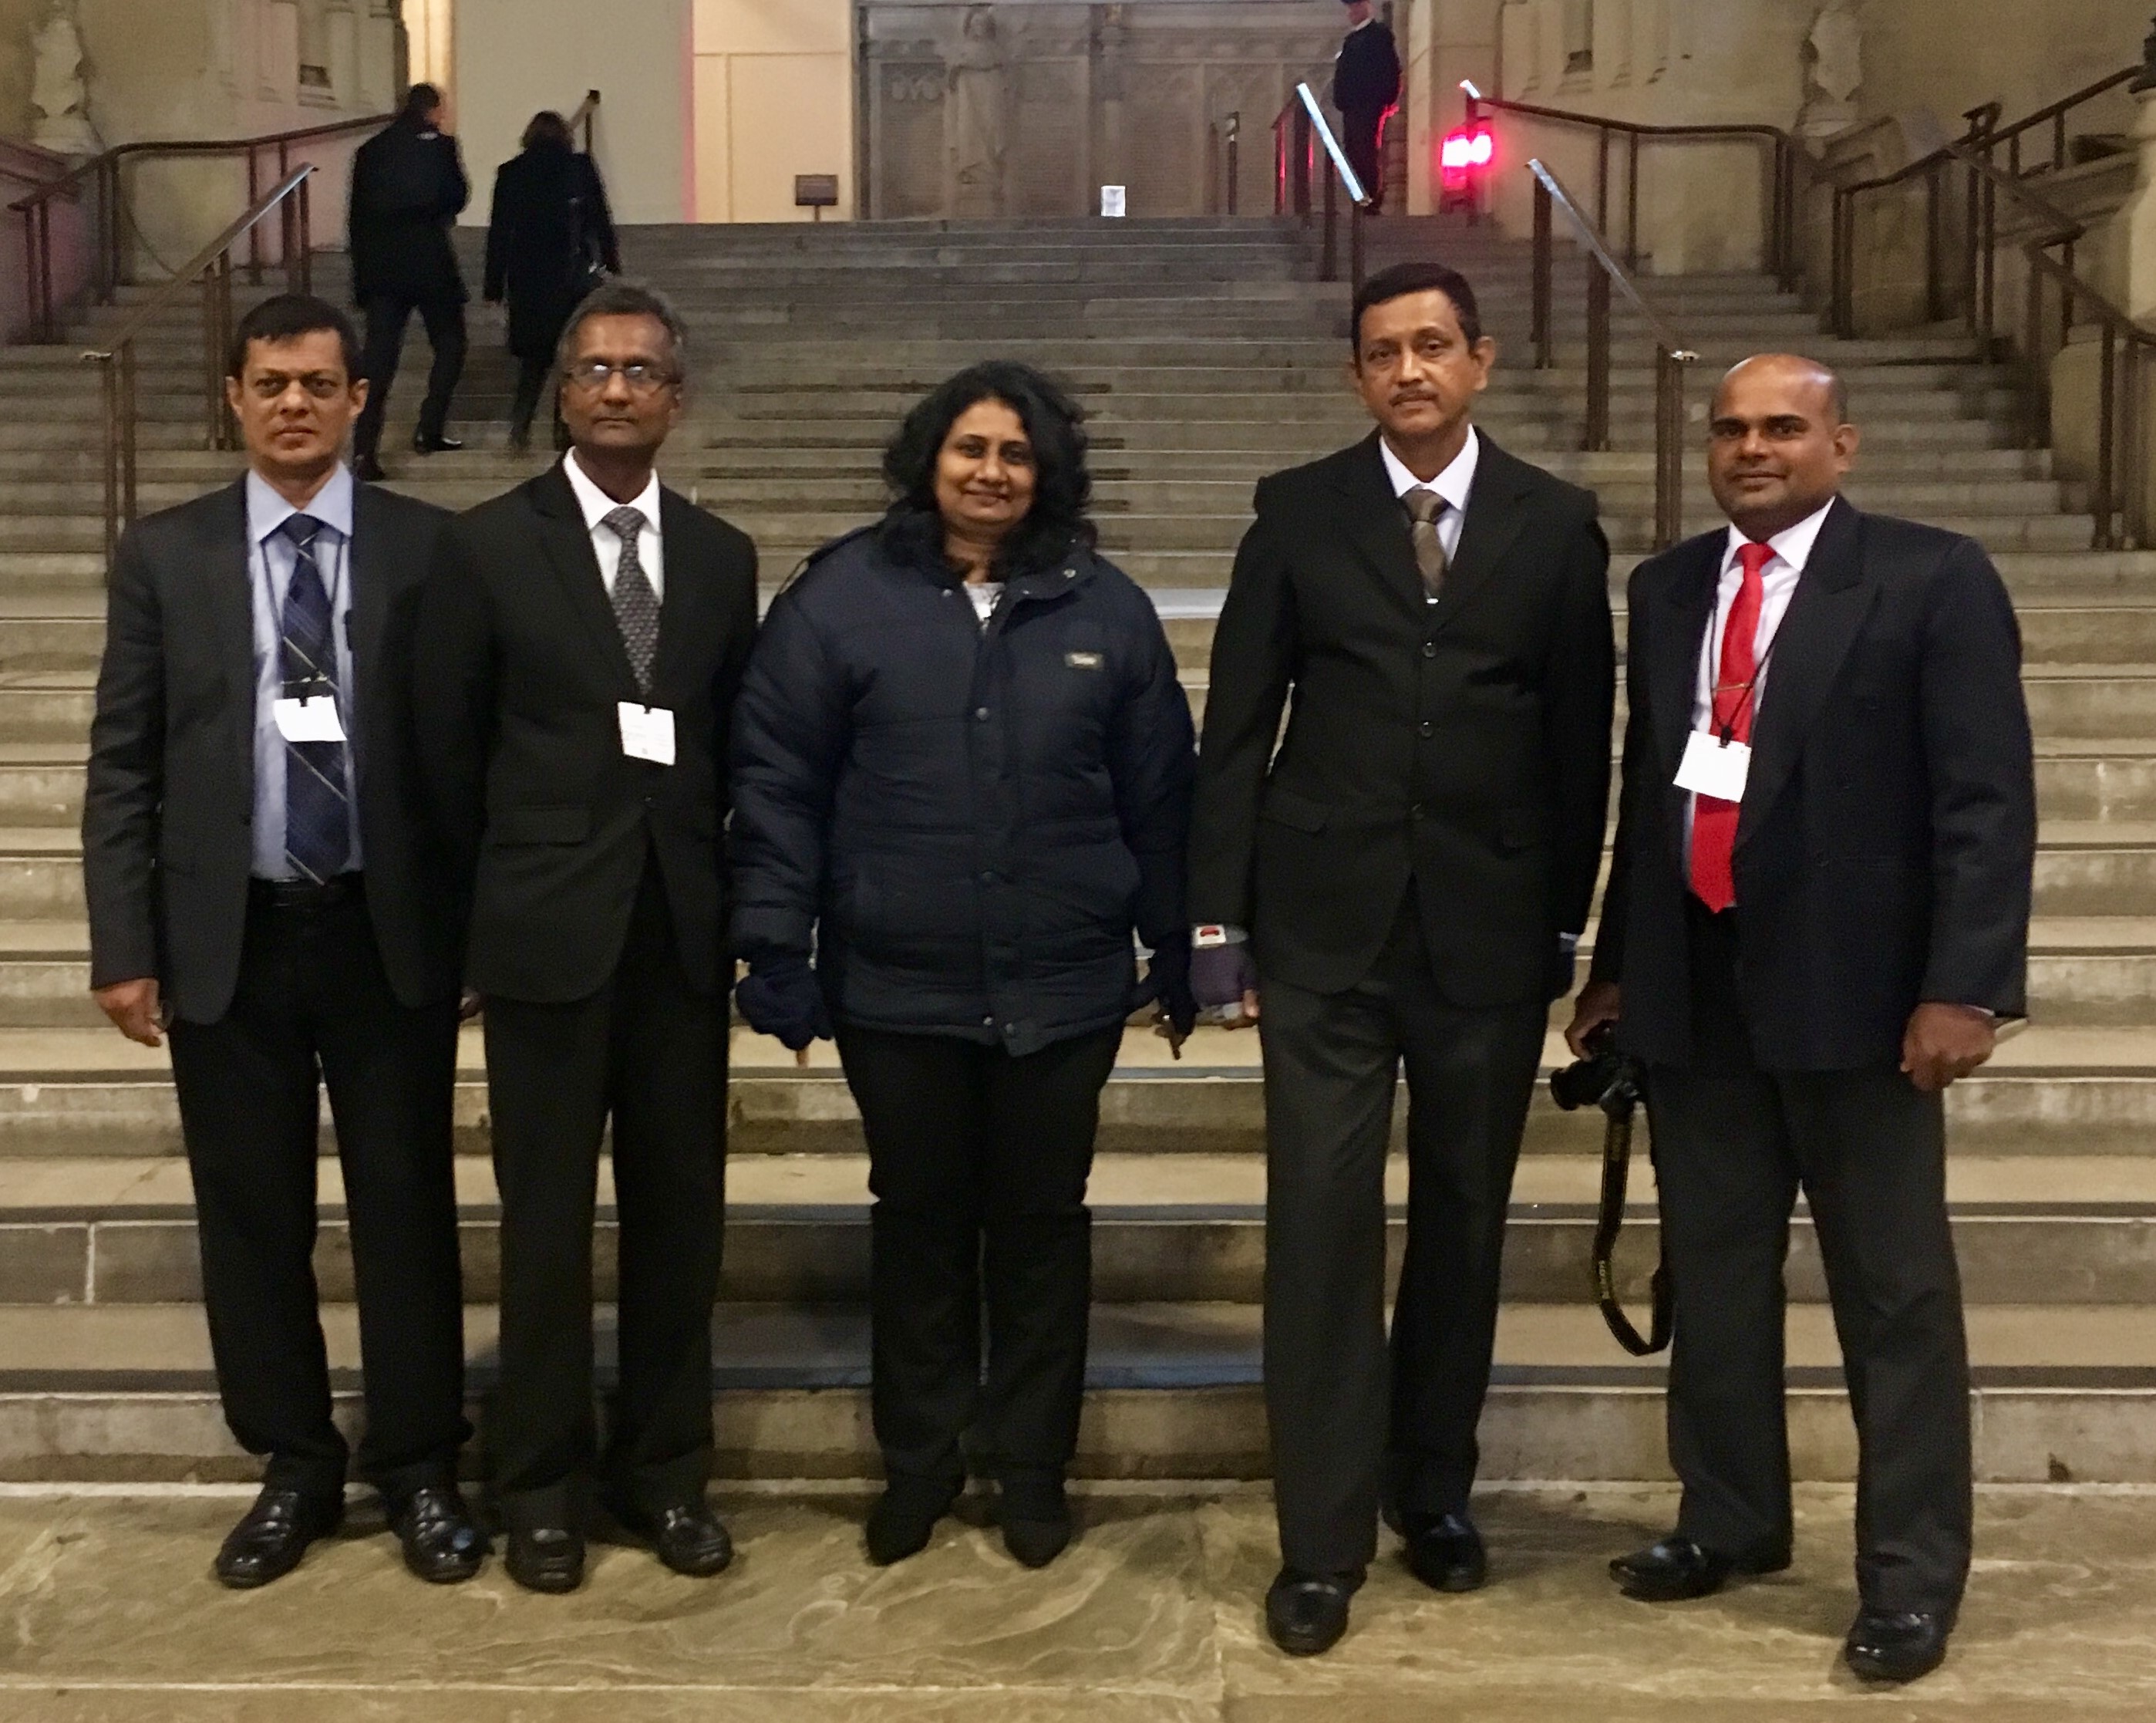 The delegation visits the Palace of Westminster